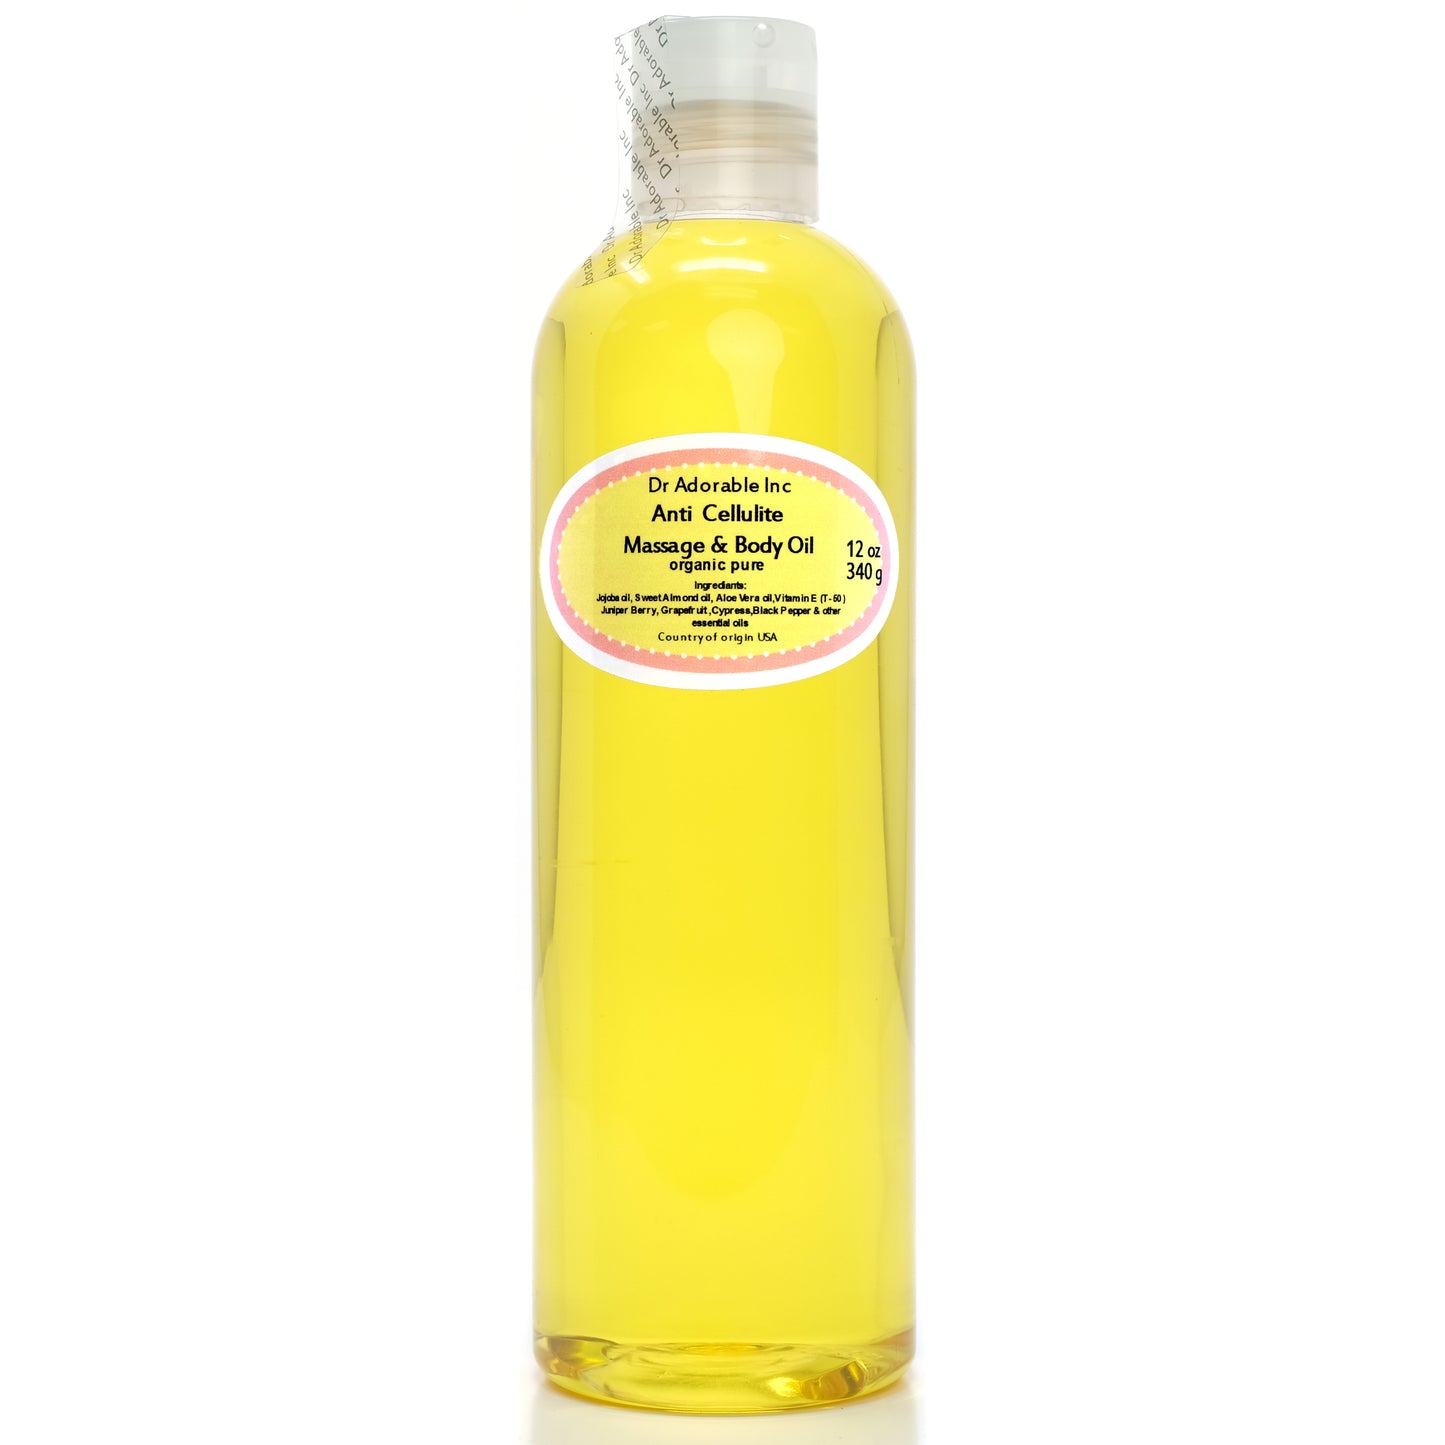 Anti Cellulite Body Massage Oil - with a Firming Essential and Carrier Oils Blend